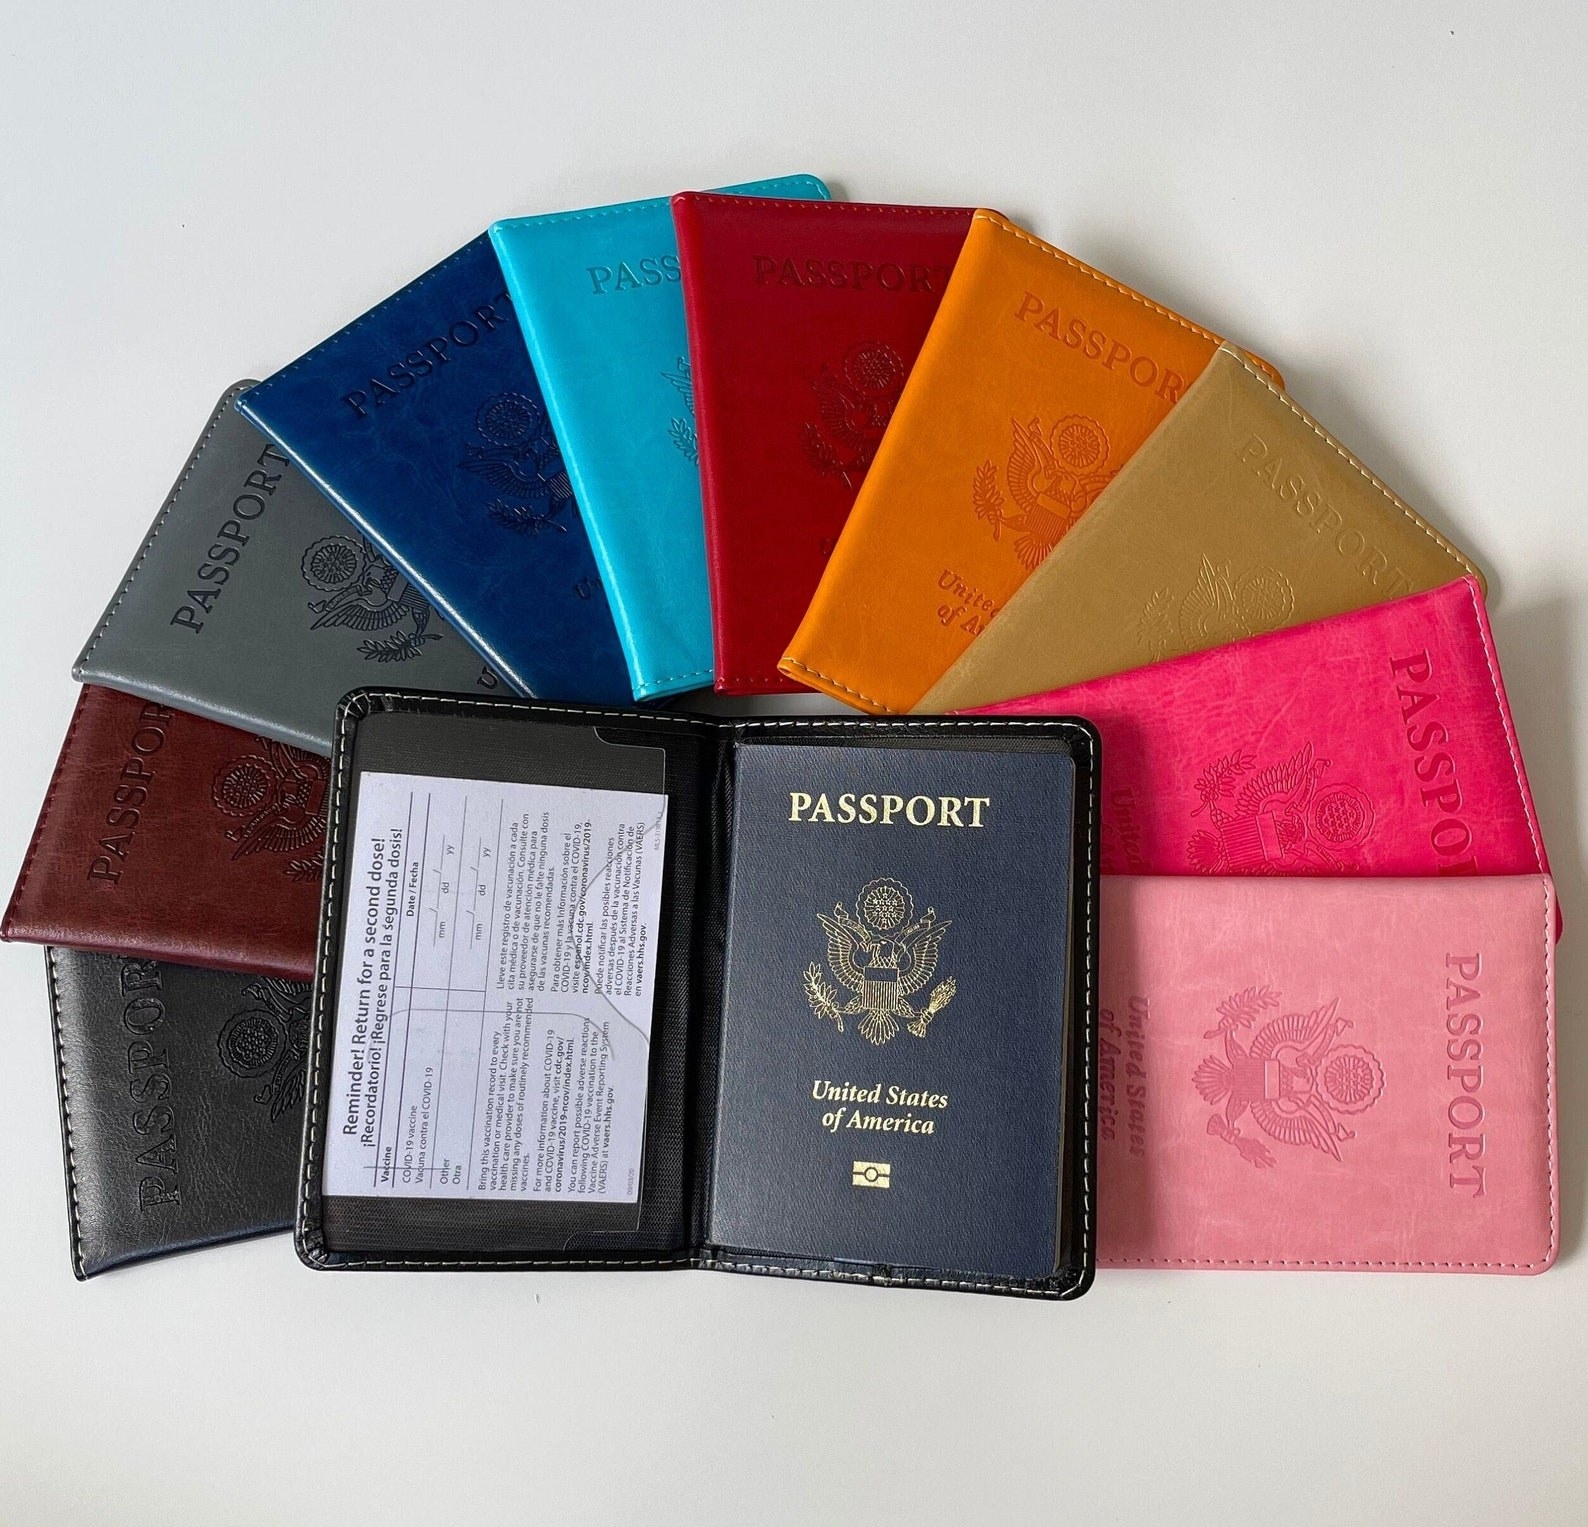 The black card holder surrounded by other card holders in all 10 colors